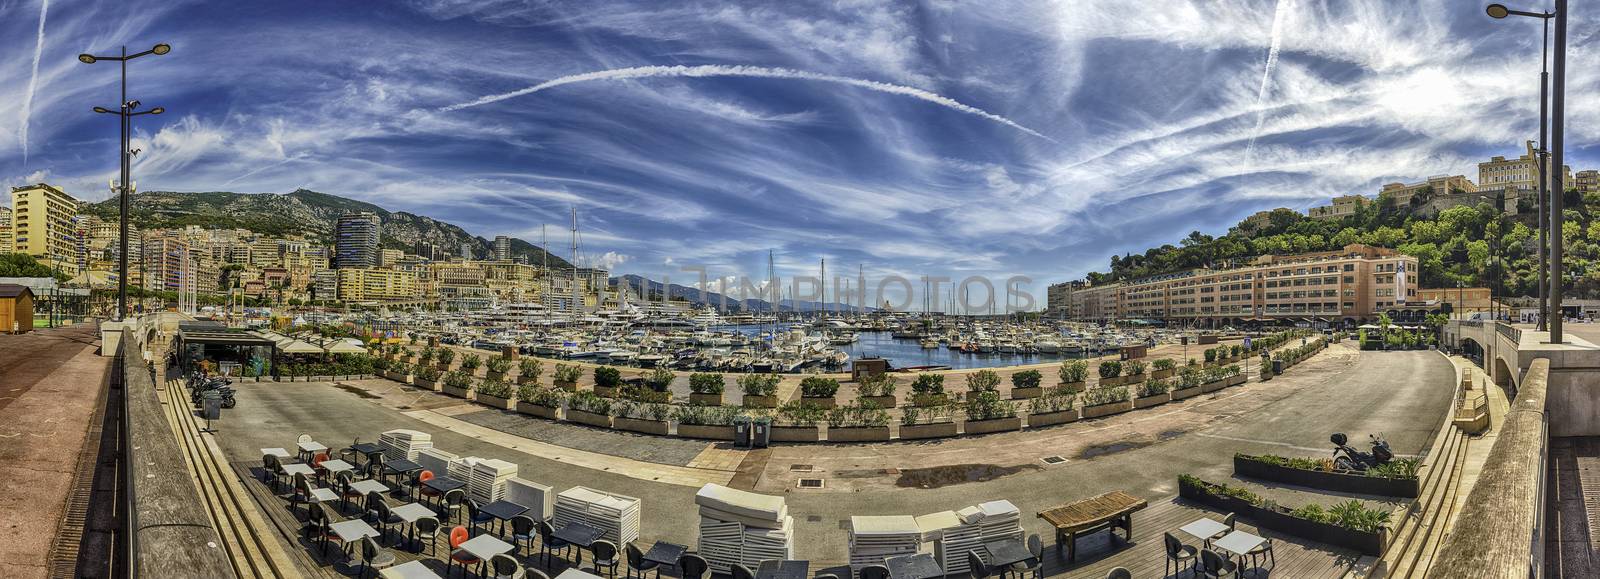 Panoramic view over luxury yachts and apartments of Port Hercules in La Condamine district, city centre and harbour of Monte Carlo, Cote d'Azur, Monaco, iconic landmark of the French Riviera